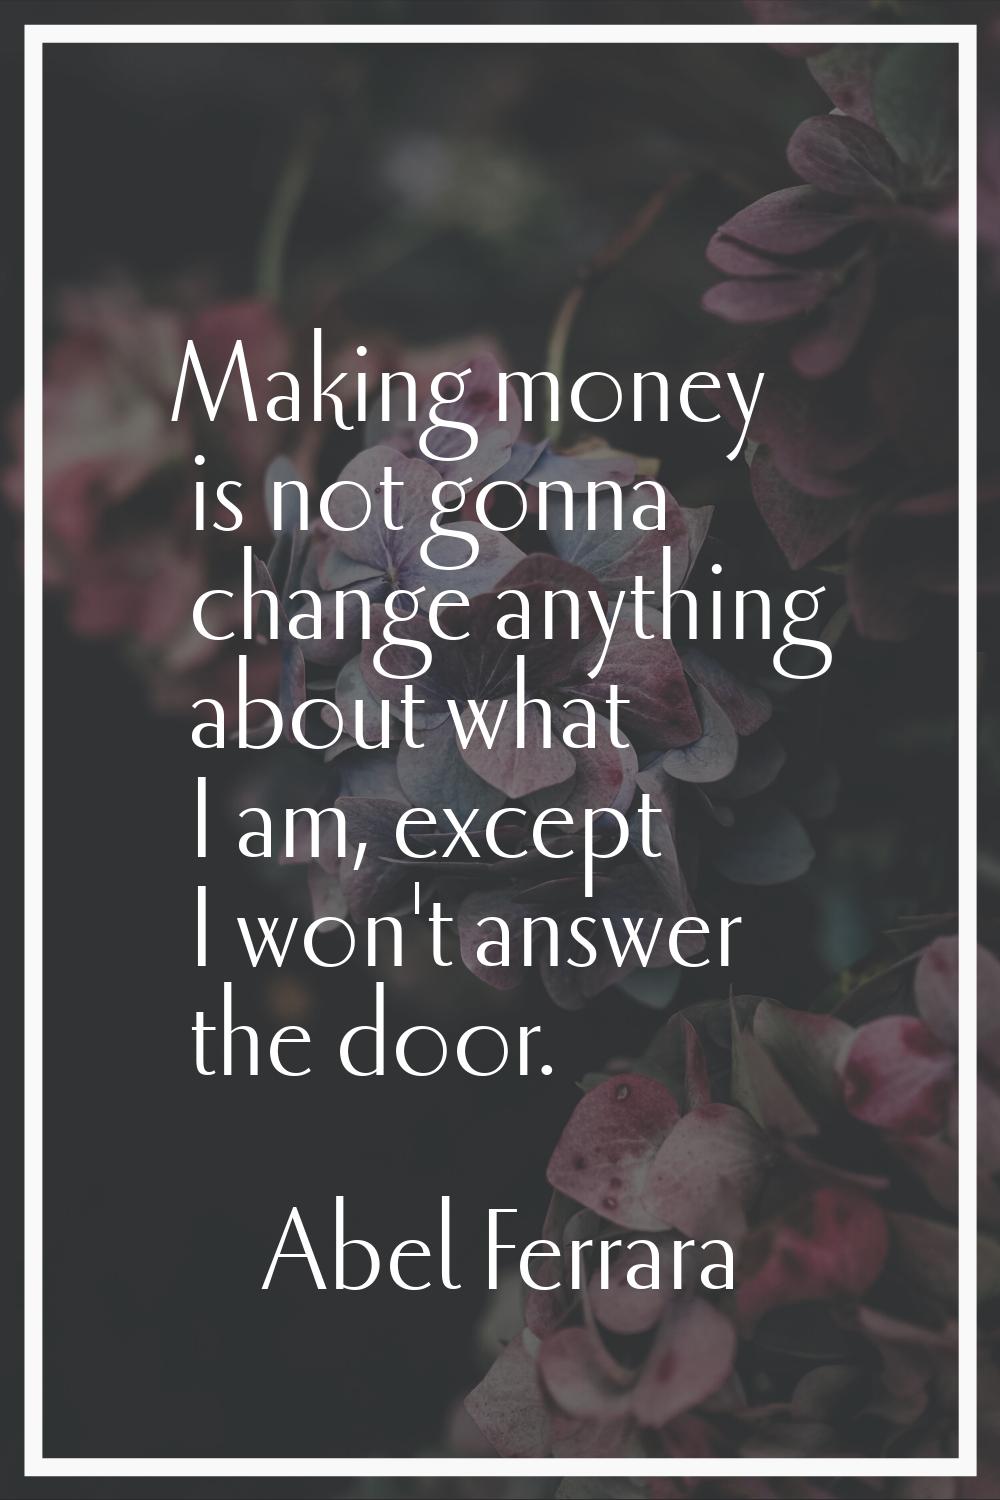 Making money is not gonna change anything about what I am, except I won't answer the door.